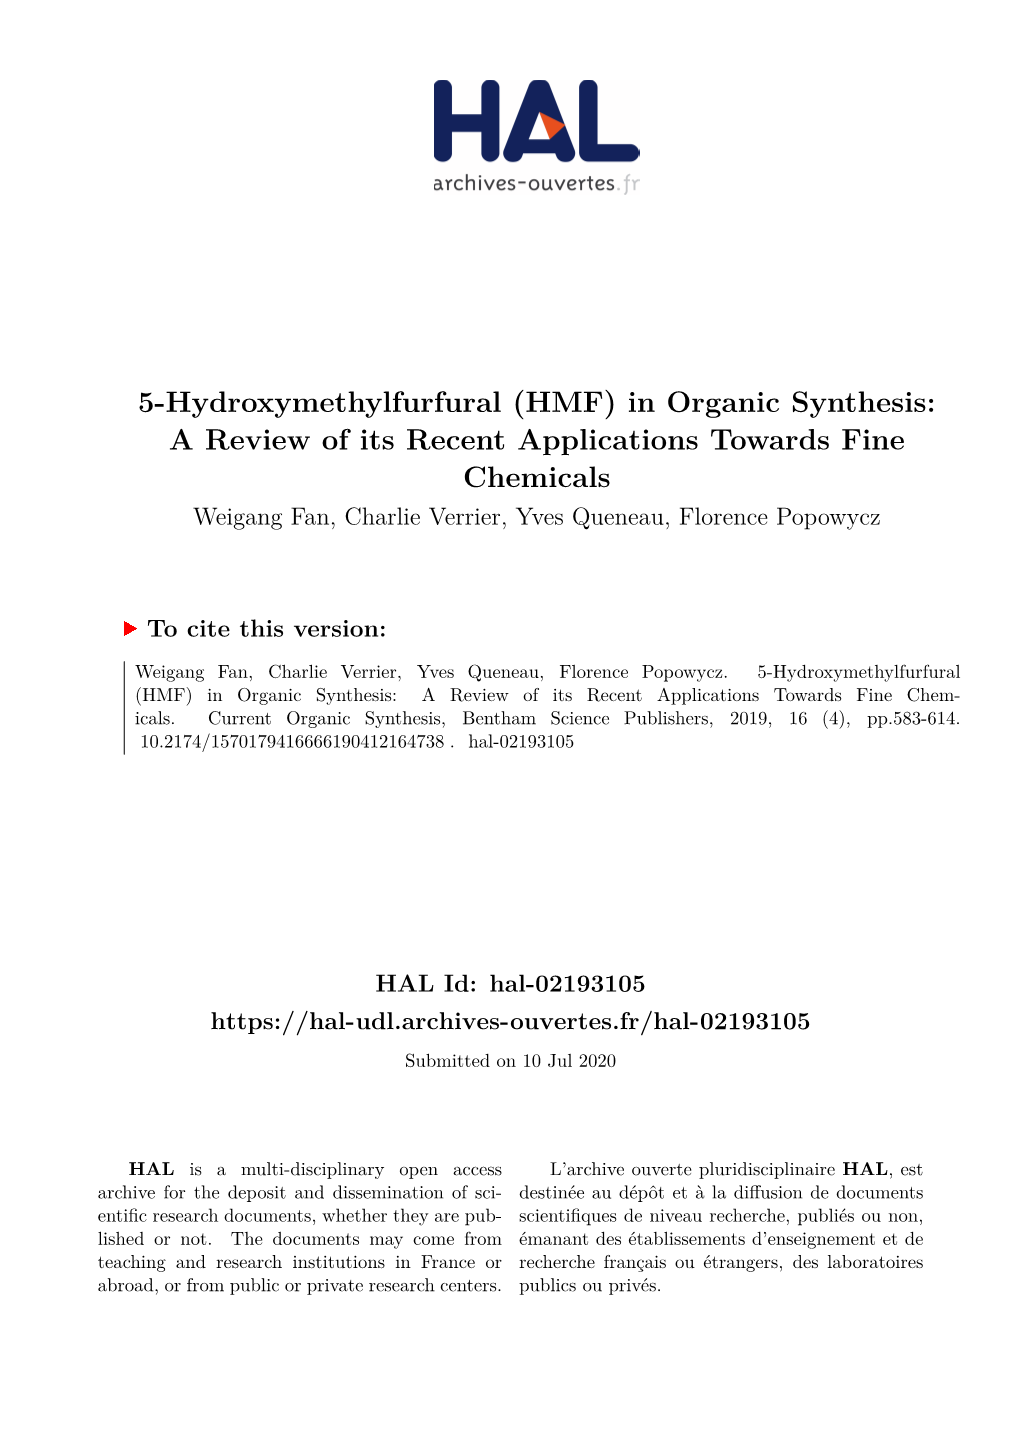 5-Hydroxymethylfurfural (HMF) in Organic Synthesis: a Review of Its